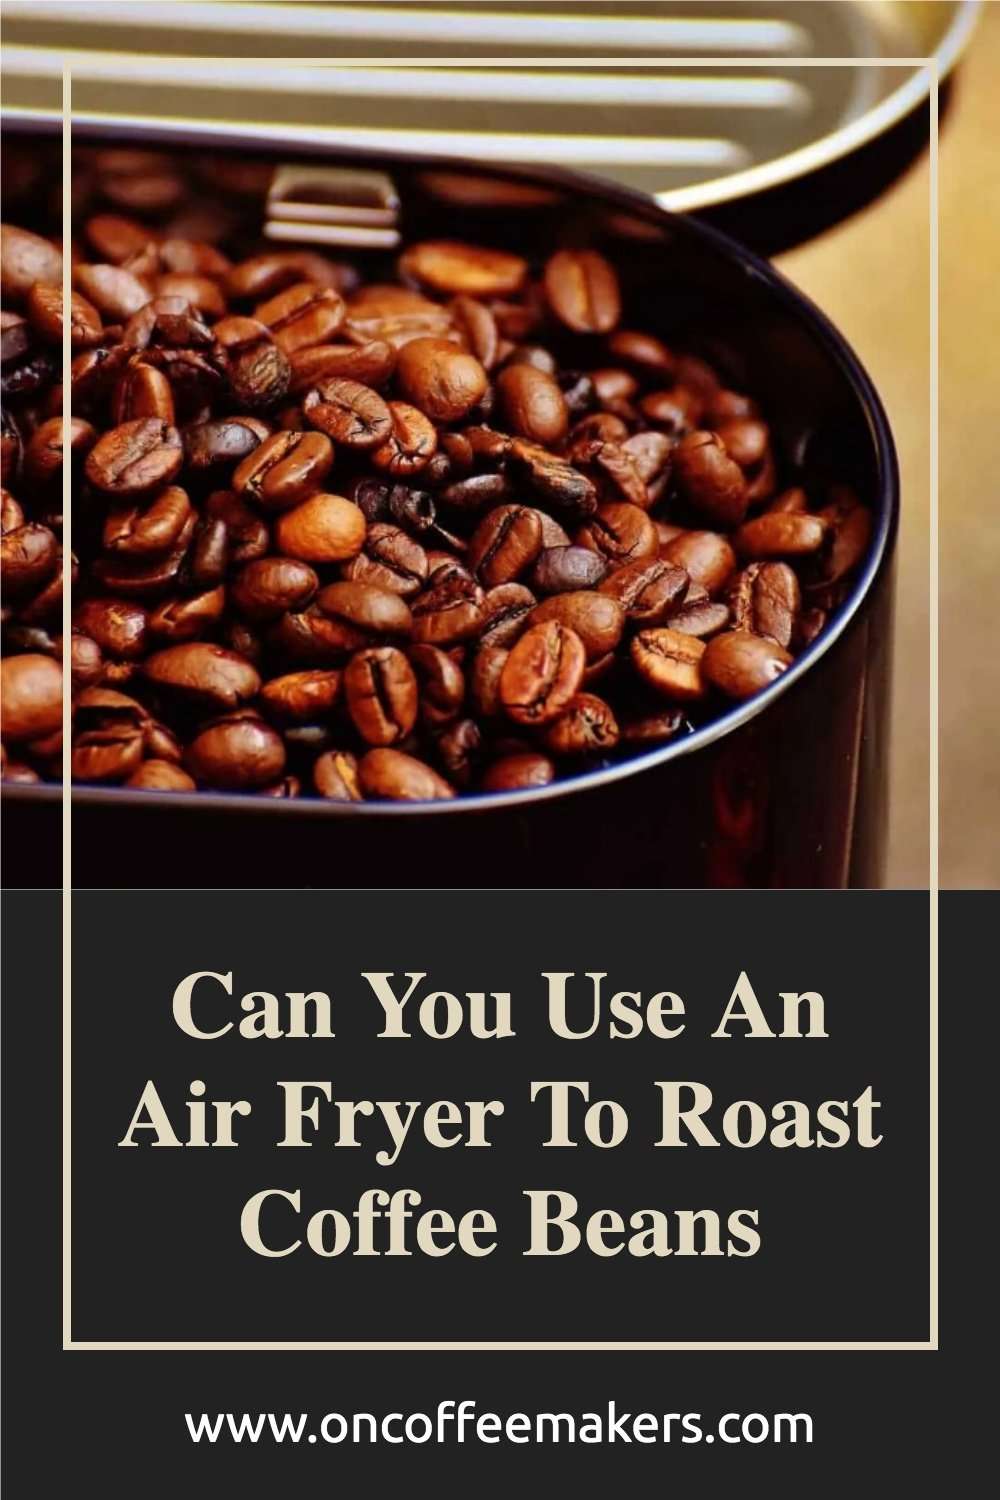 Can You Use An Air Fryer To Roast Coffee Beans